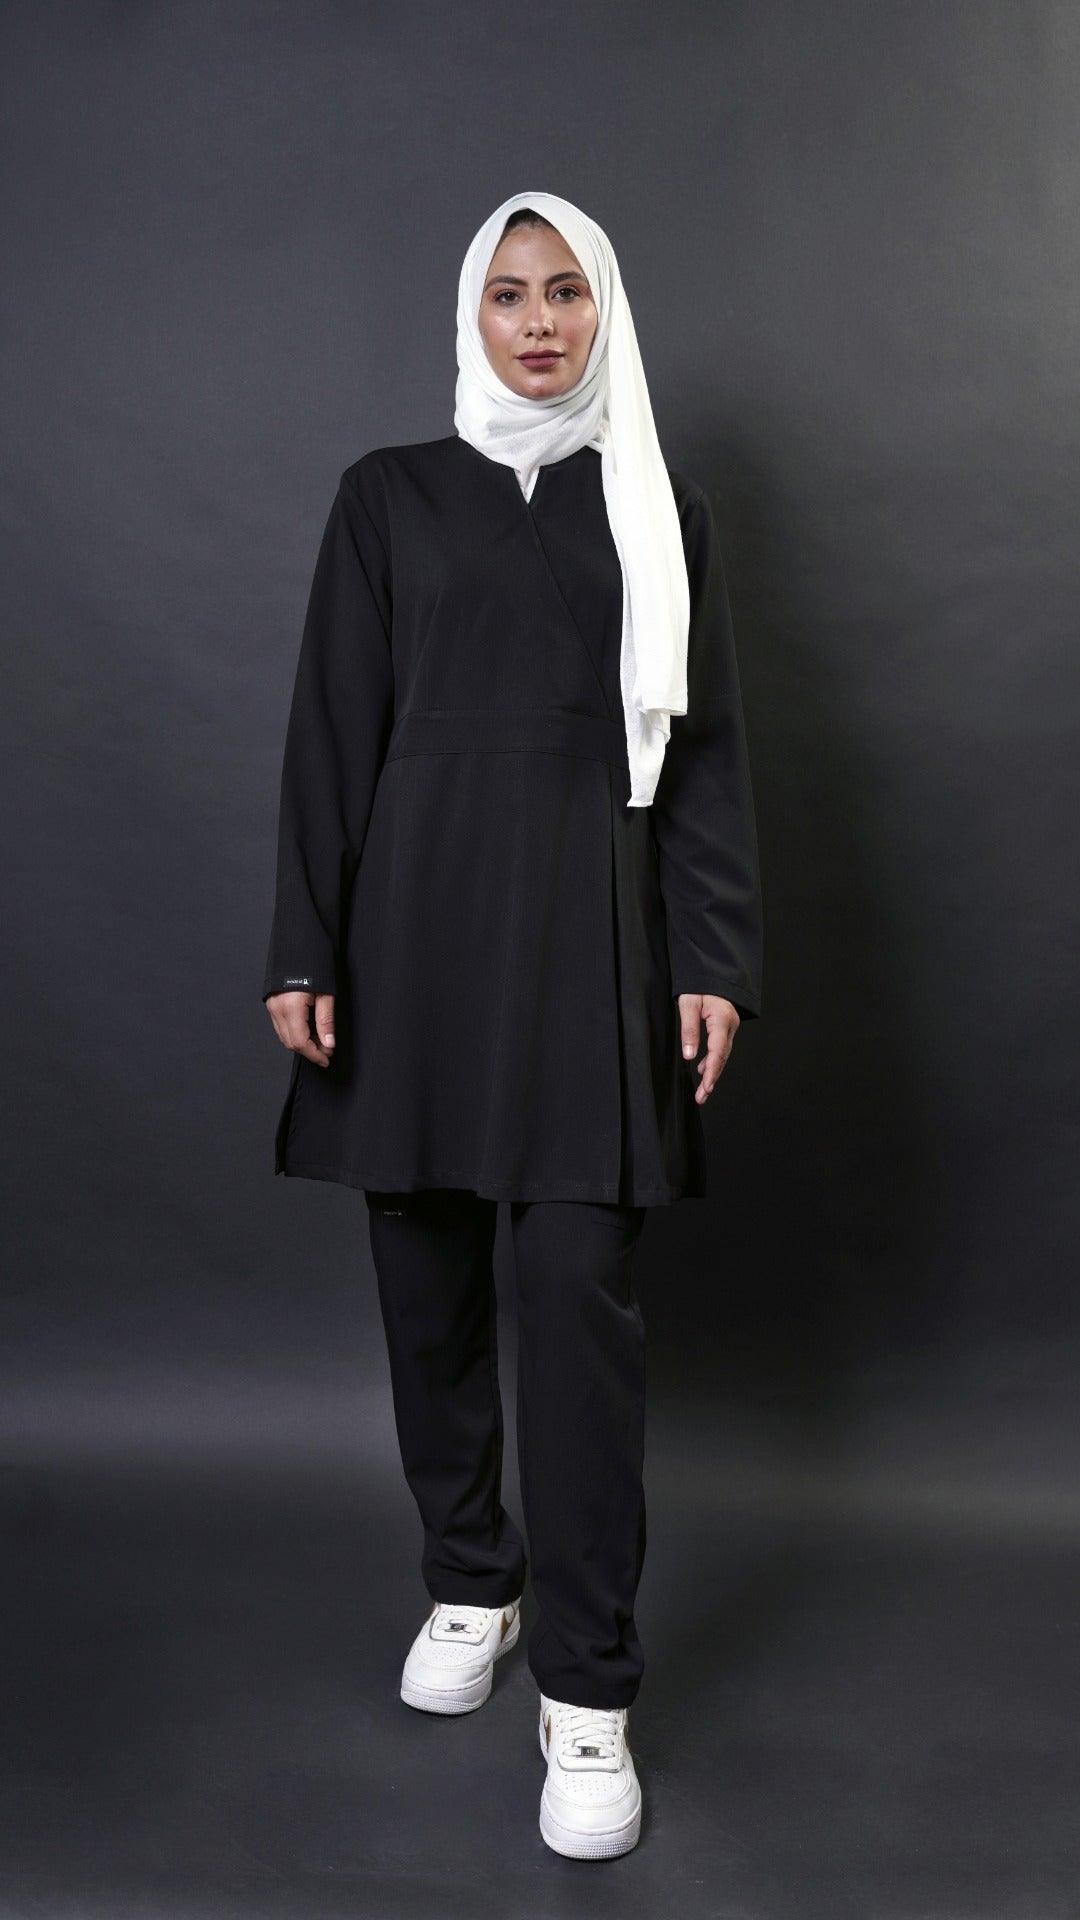   Extra long scrub top with long sleeves in black perfect for women in healthcare! This top has a 36 inch length and flare top design for a modest look. It's also hijabi friendly, so you can feel comfortable and cover the lower bottom.